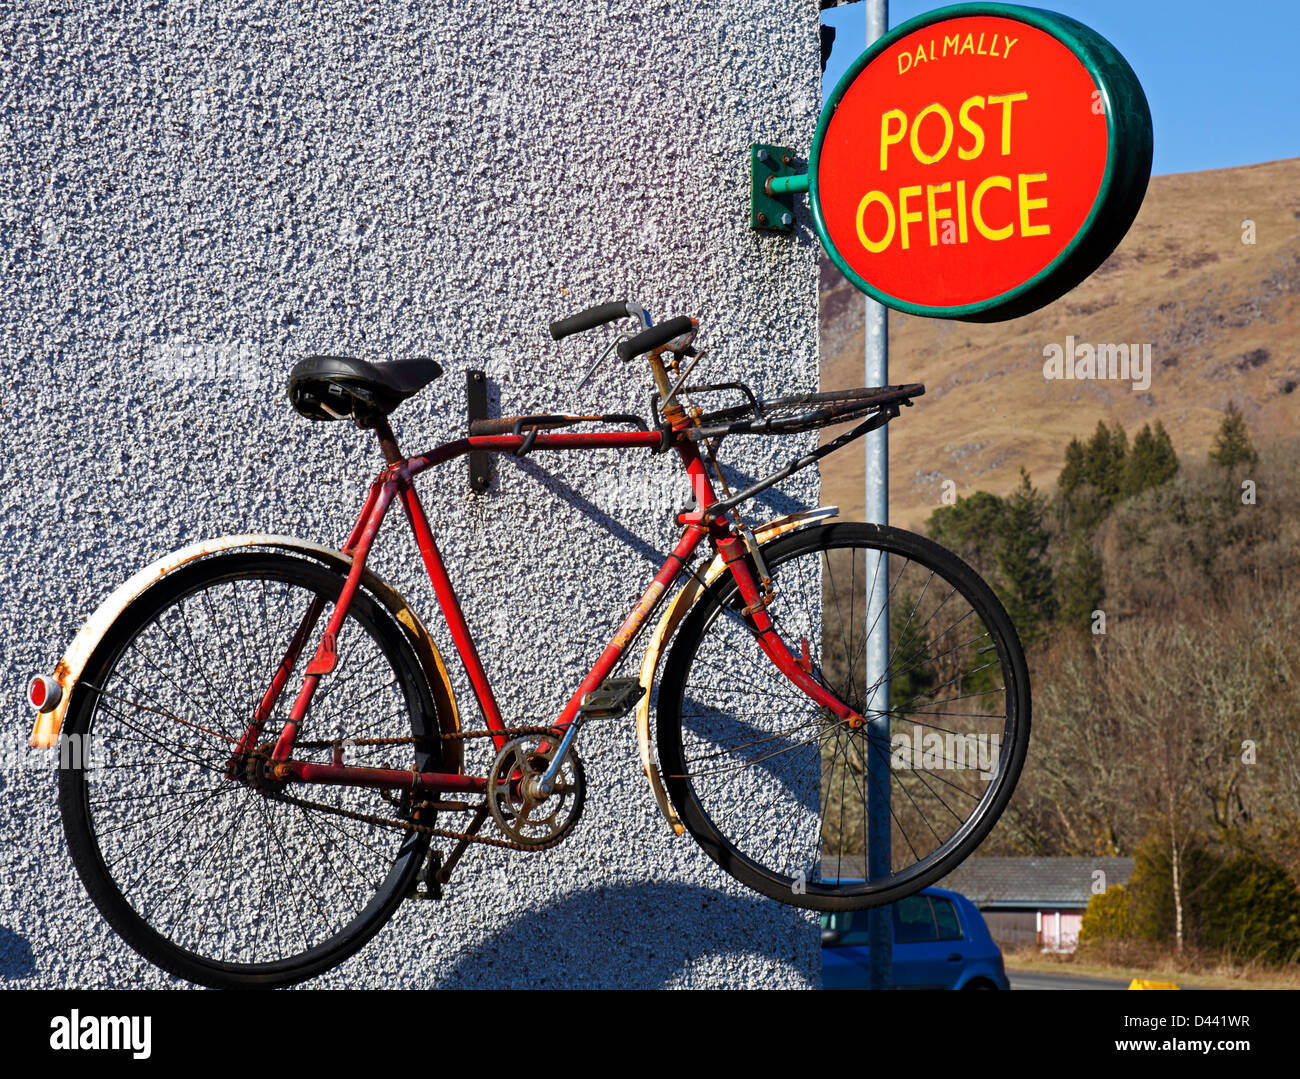 Dalmally post office with vintage bicycle Argyll and Bute Scotland UK Stock Photo